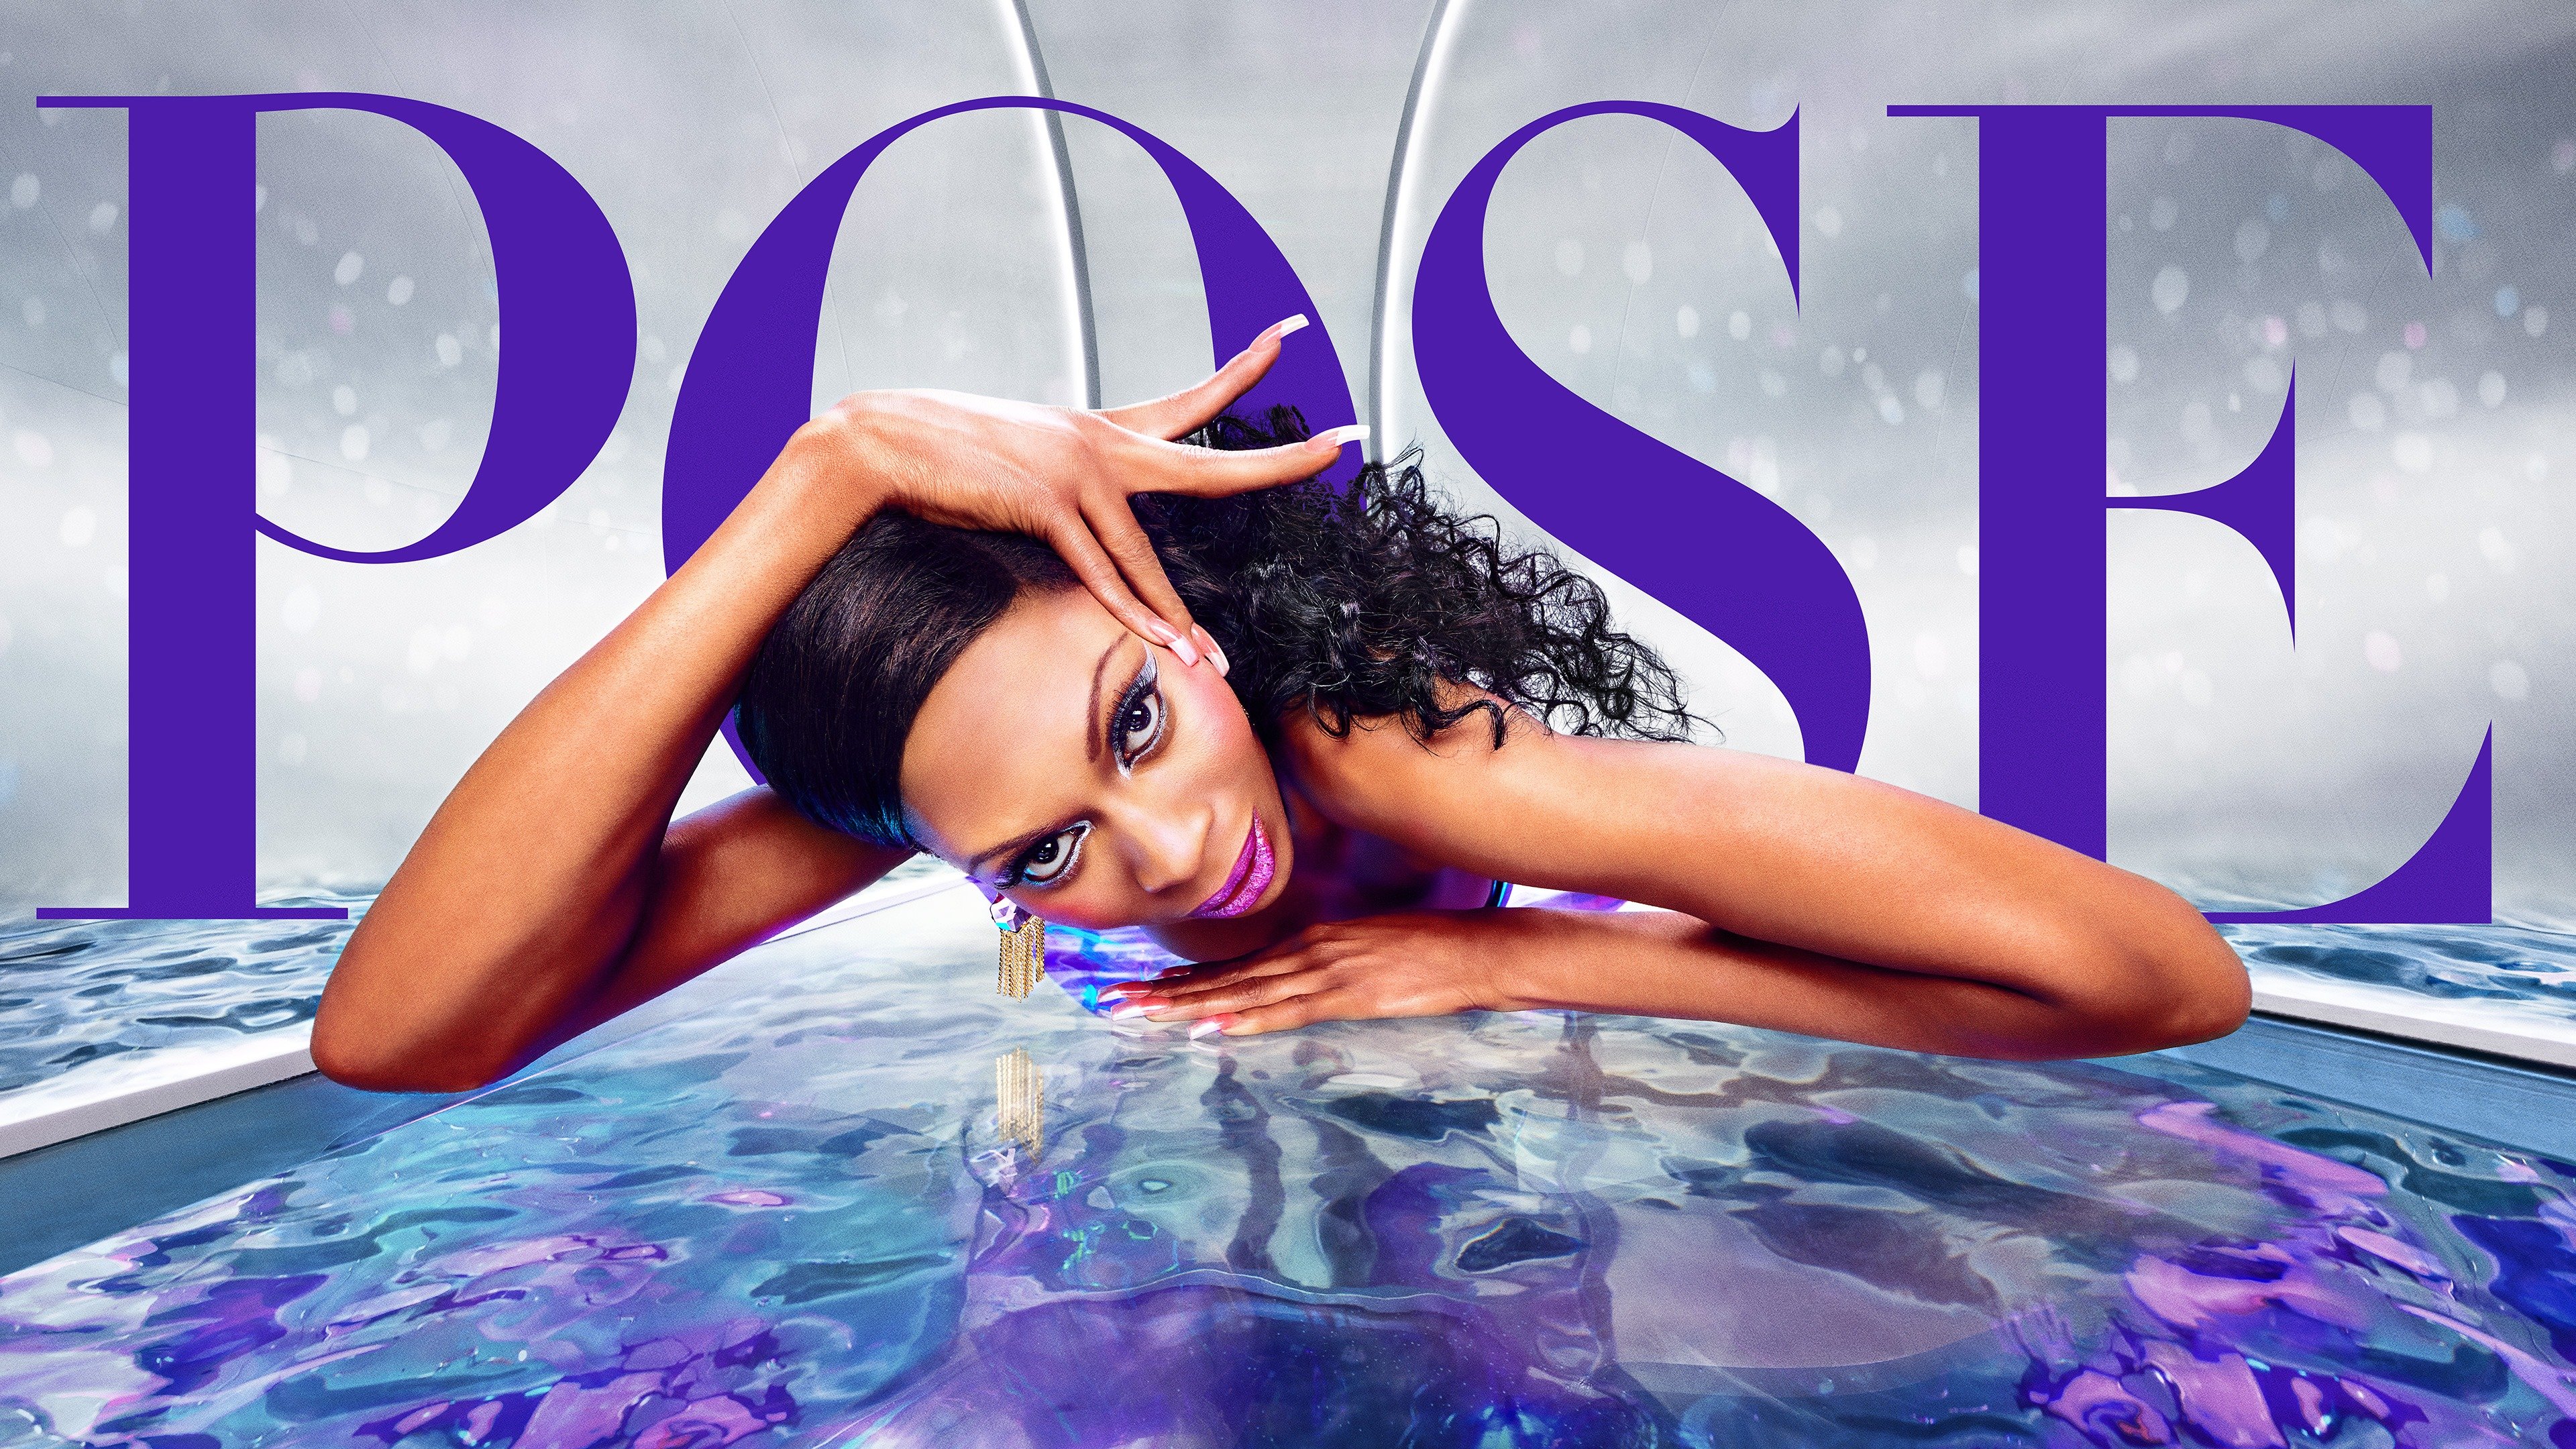 Pose season 3's major changes explained by boss